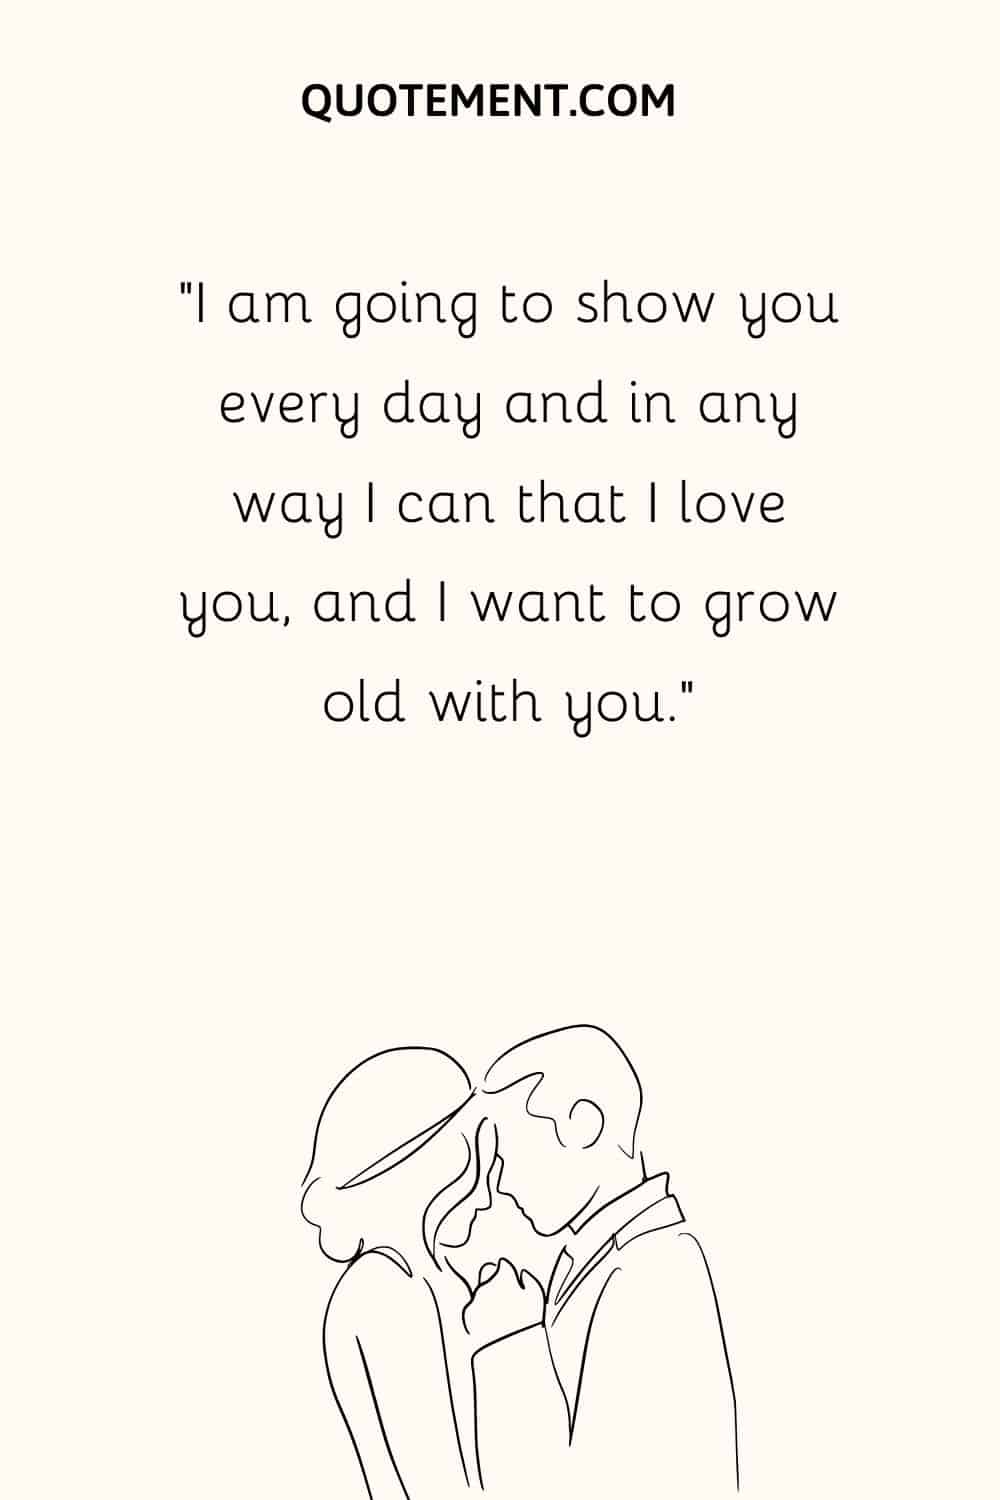 “I am going to show you every day and in any way I can that I love you, and I want to grow old with you.”